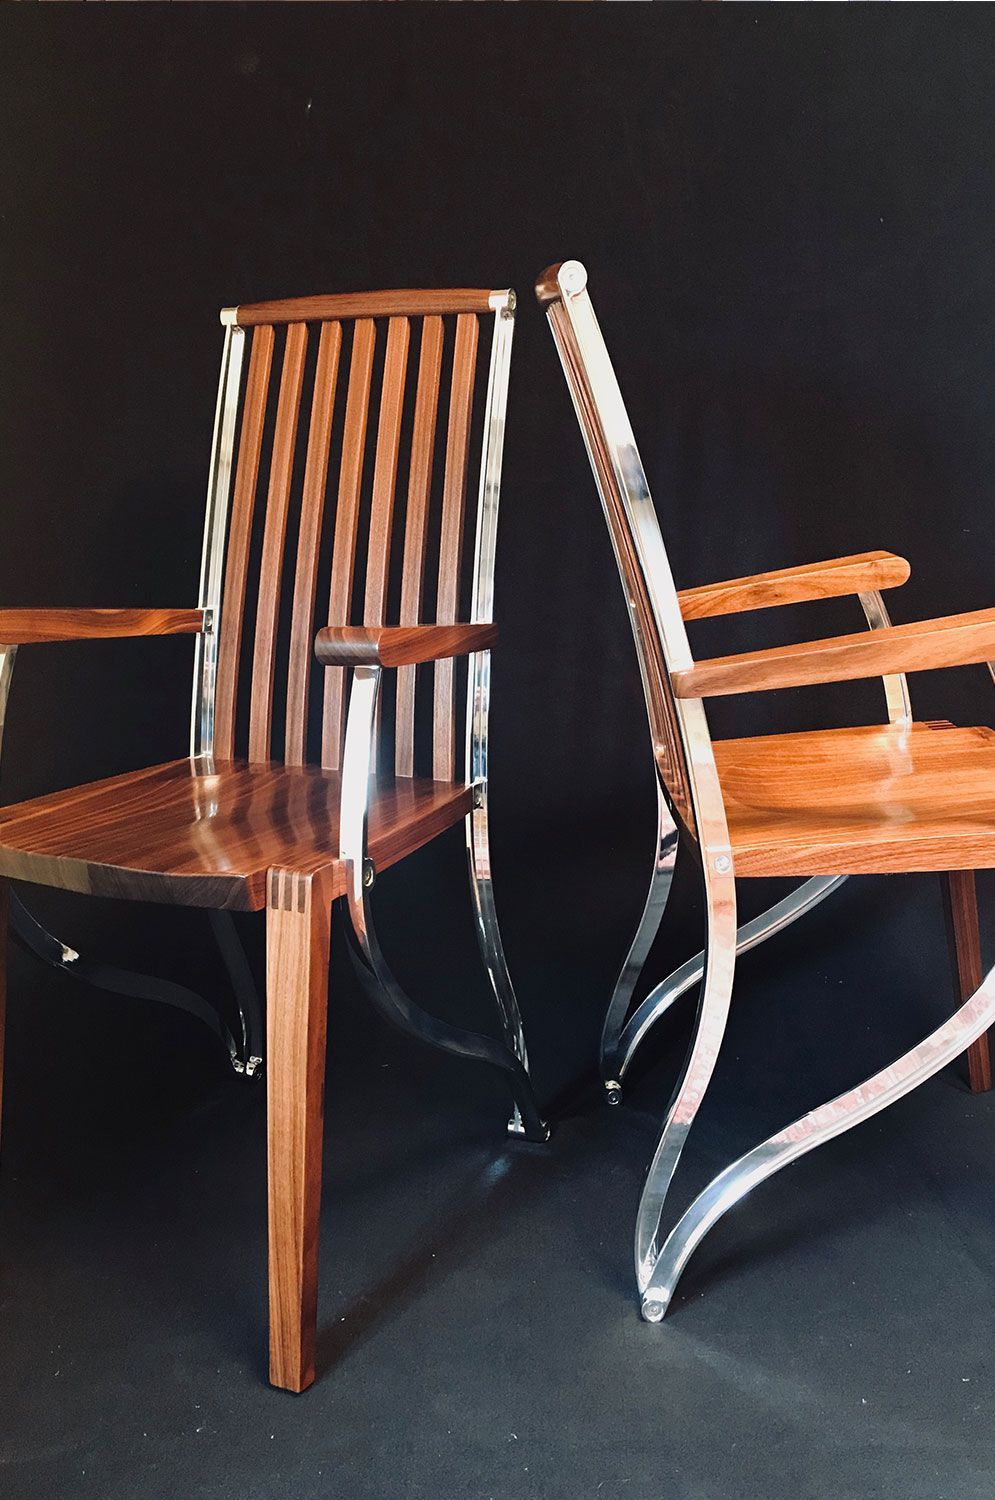 Two wooden chairs are sitting next to each other